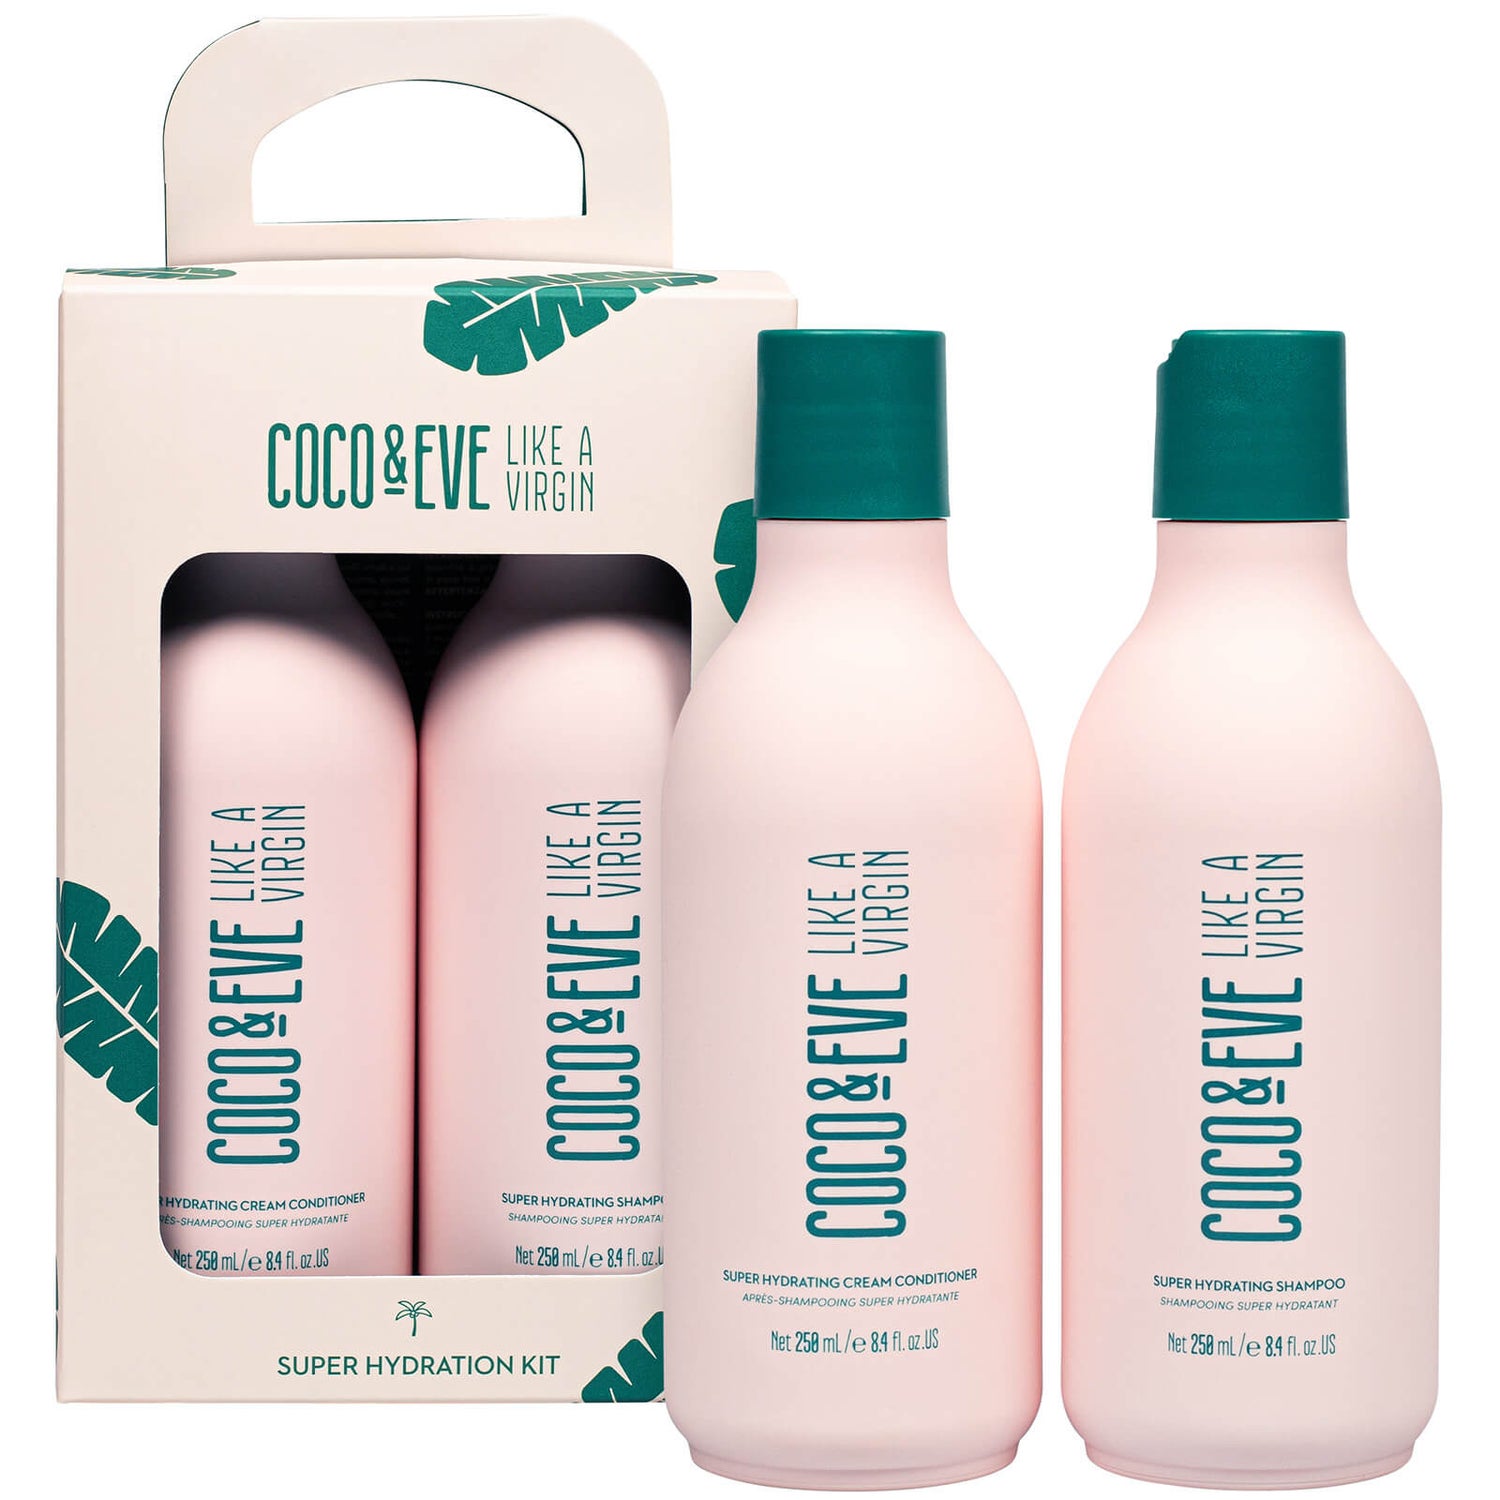 Coco & Eve Super Hydration Kit (£45.80)